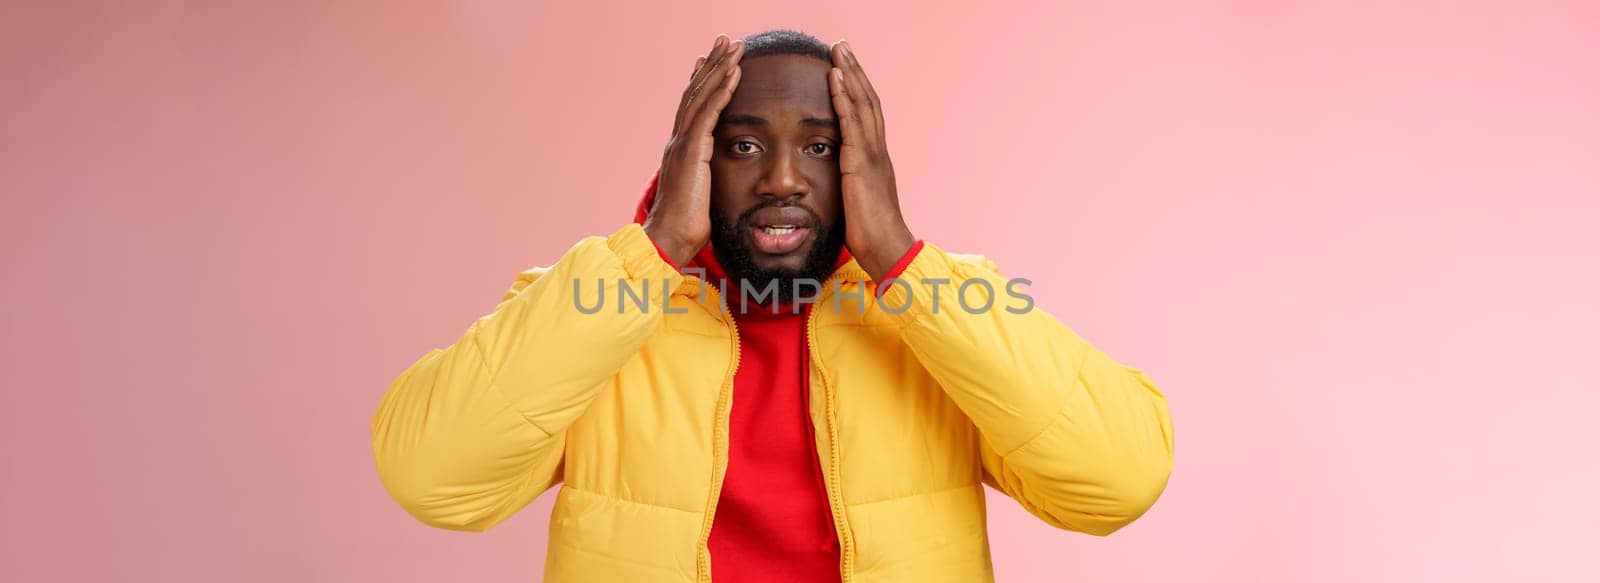 Shocked upset african-american bearded guy feel regret stunned hear terrible news hold hands head widen eyes stupor standing speechless troubled, look perplexed terribly sad, pink background.